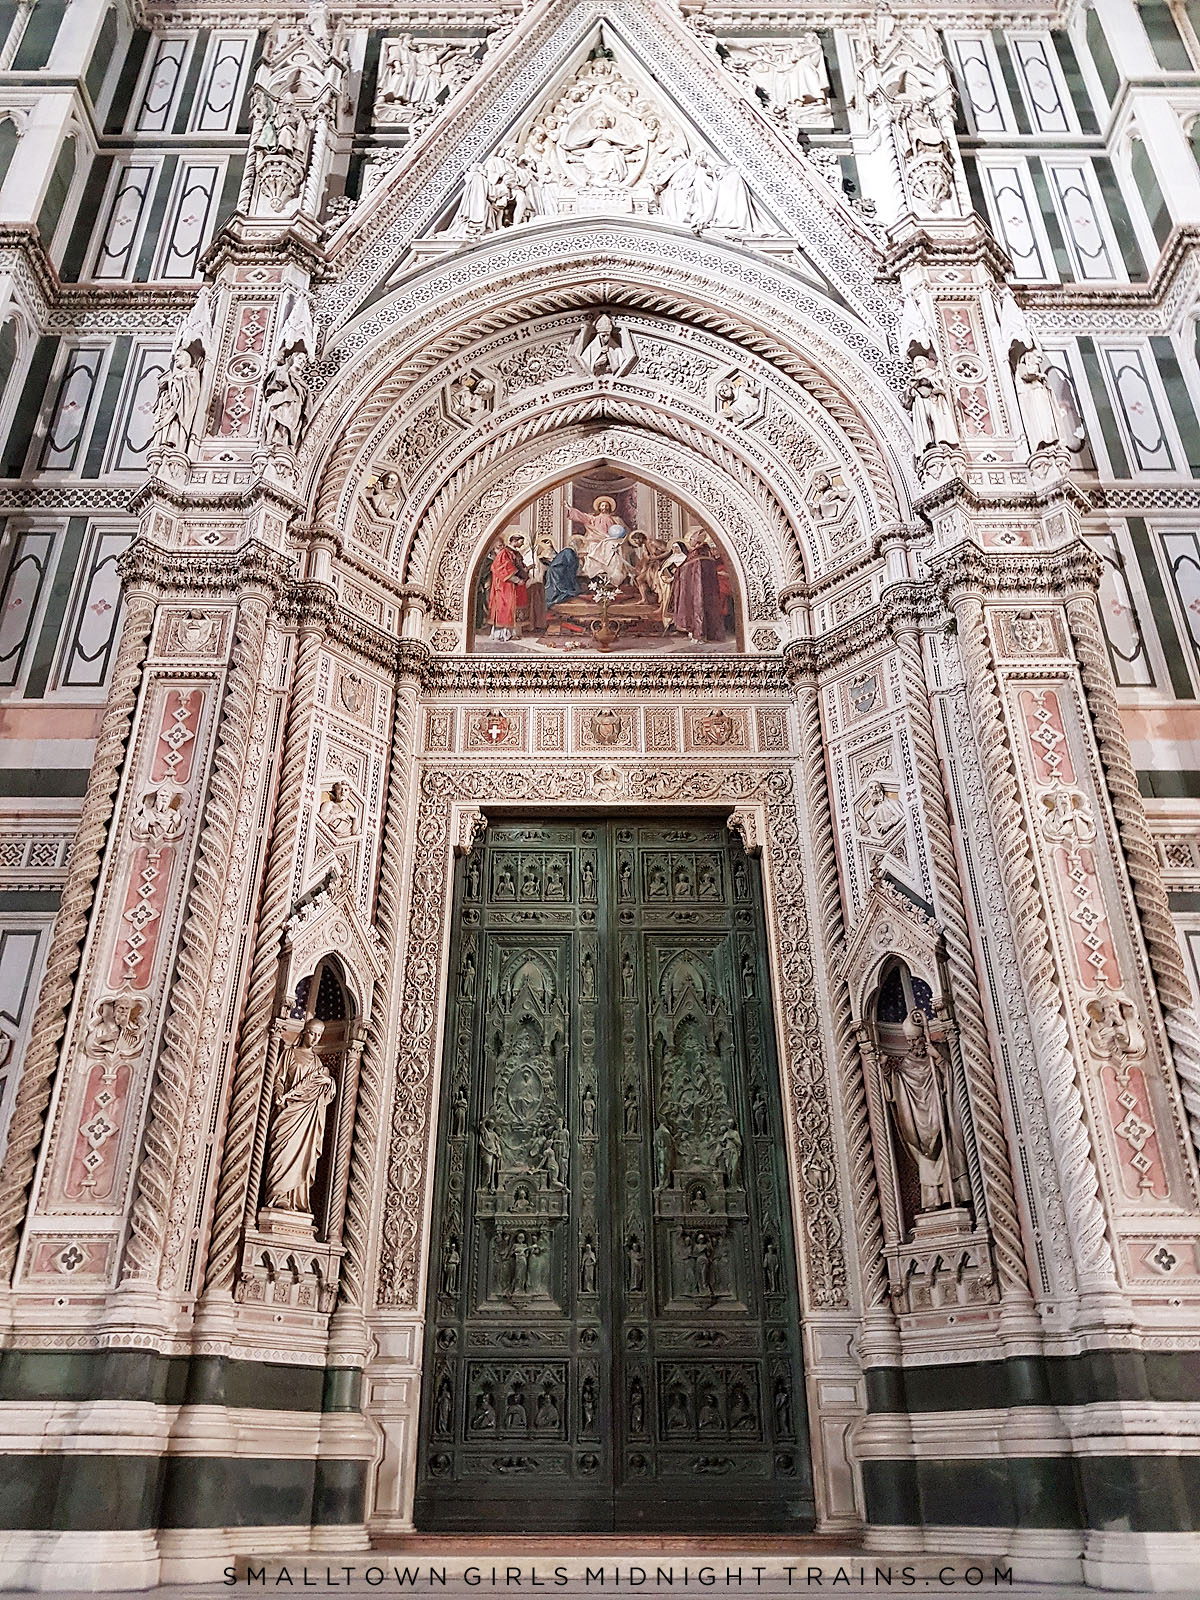 The Duomo (Florence Cathedral | Cattedrale di Santa Maria del Fiore) and Baptistery of Saint John (Florence Baptistery)